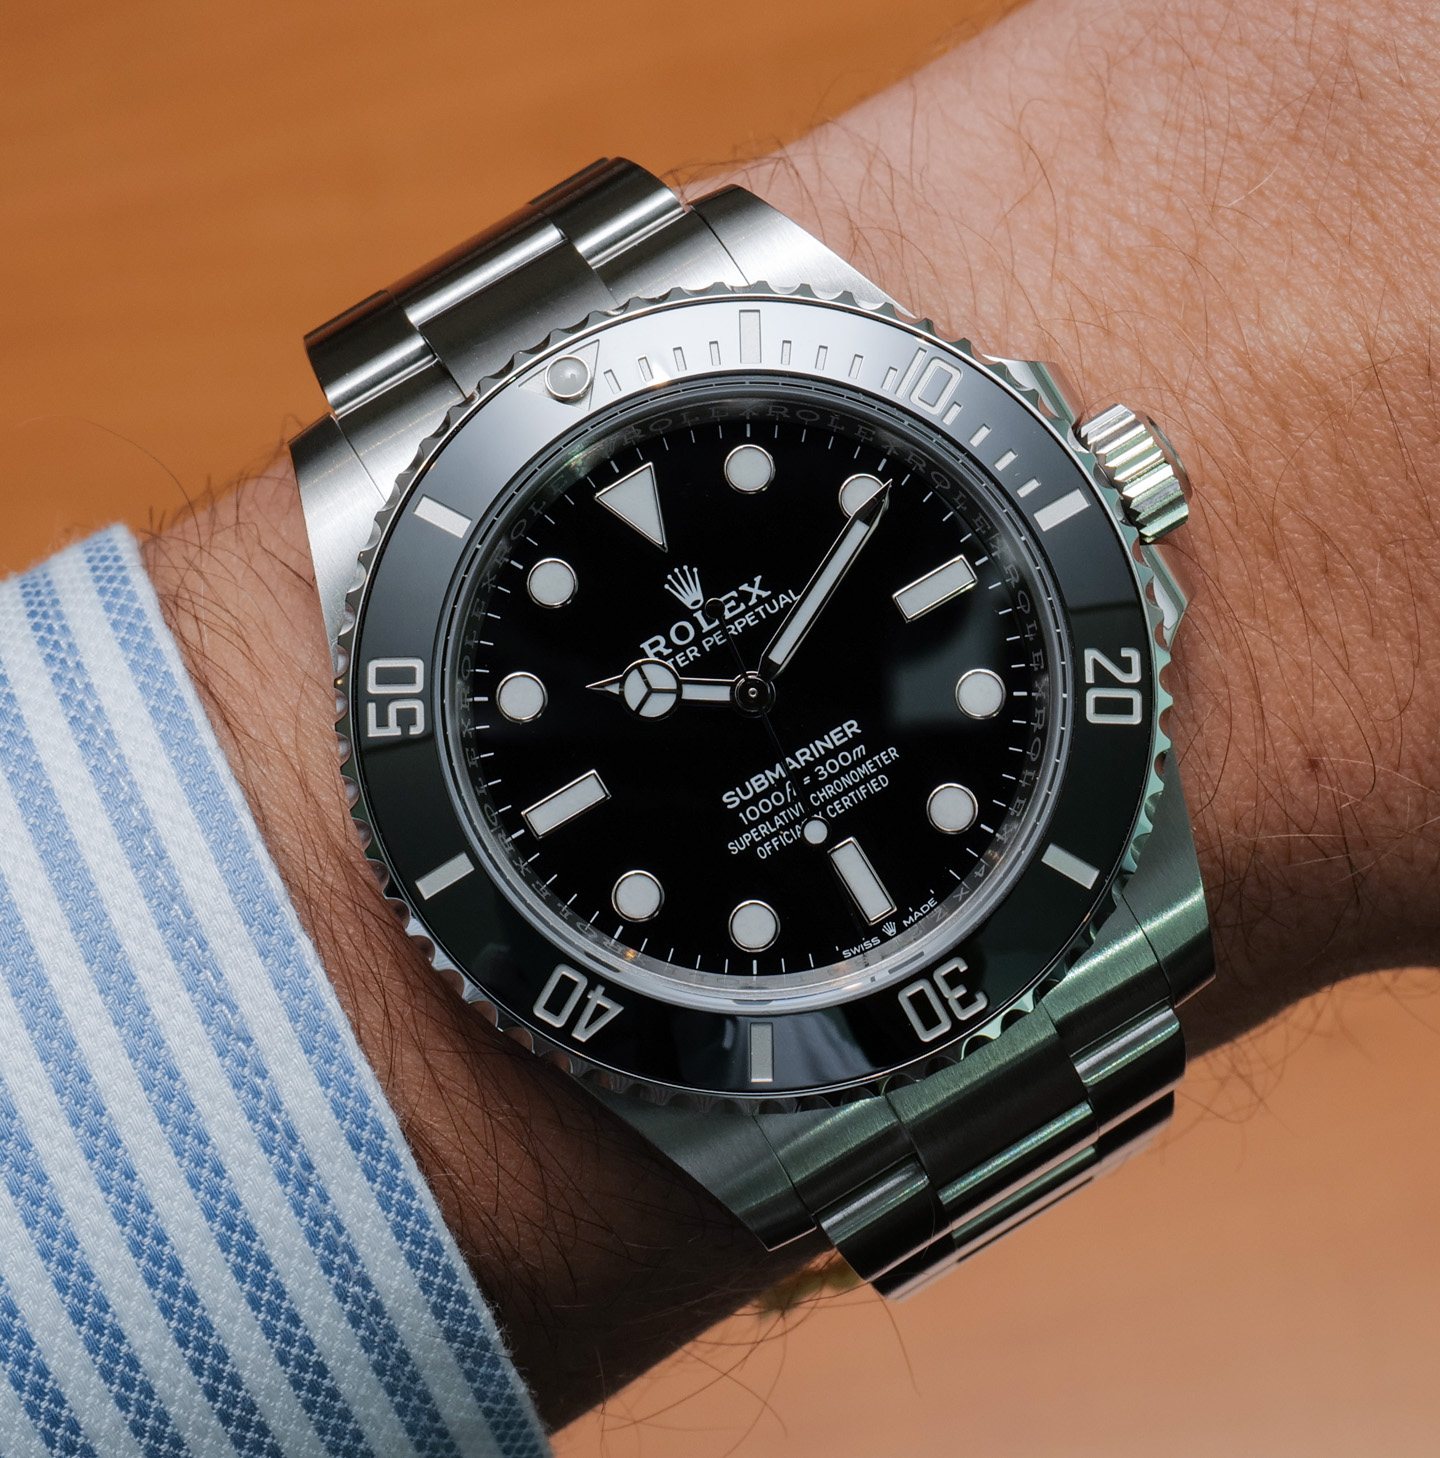 price of a new rolex submariner